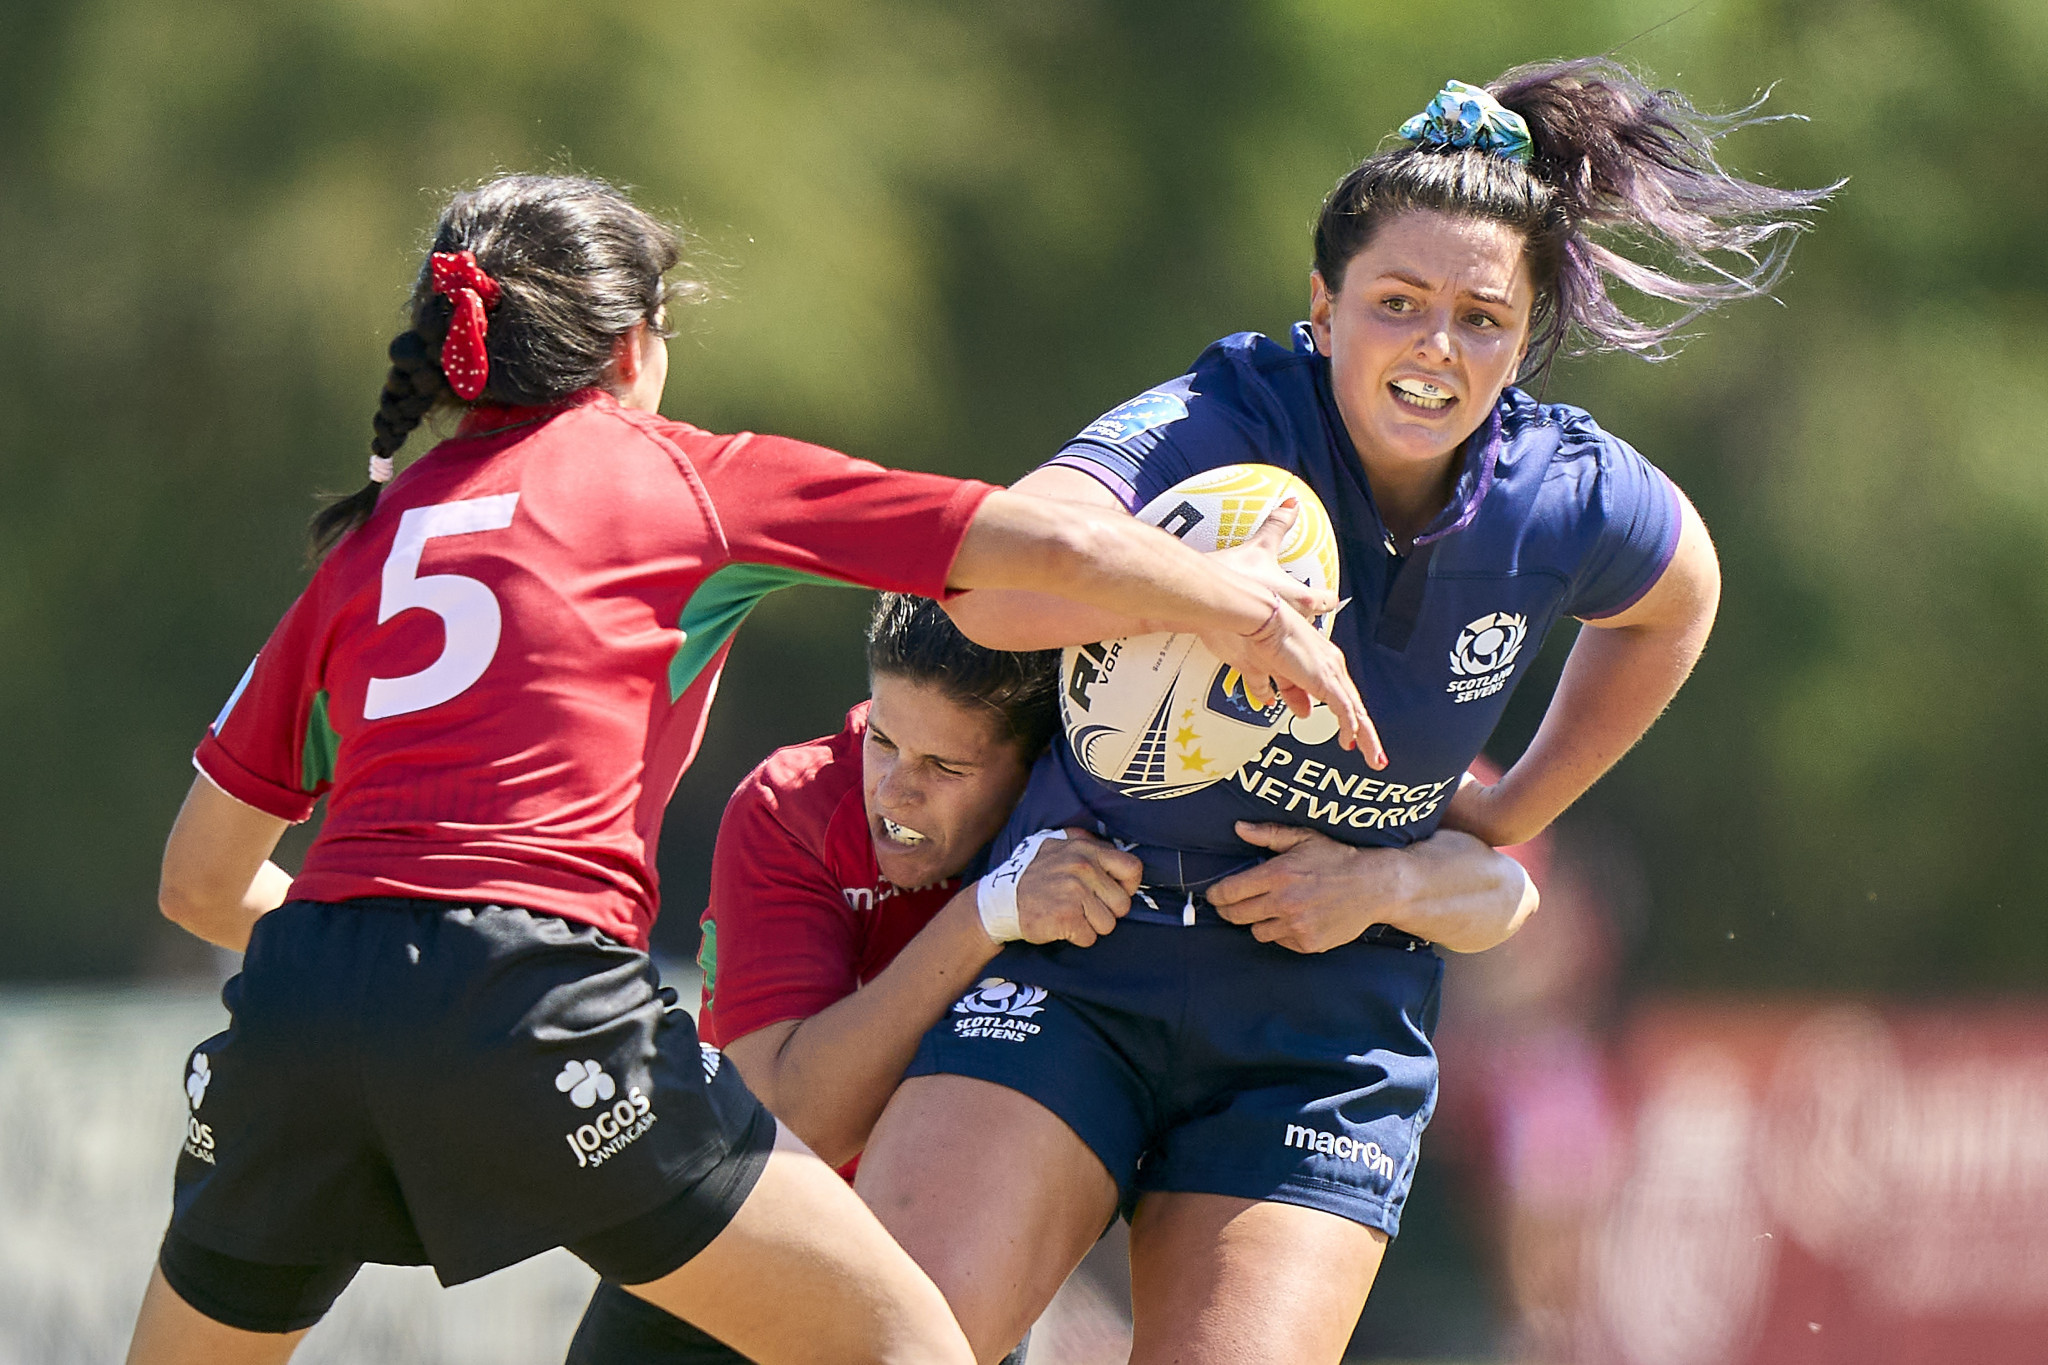 Scotland women's rugby sevens team qualify for Birmingham 2022 to set up Commonwealth debut